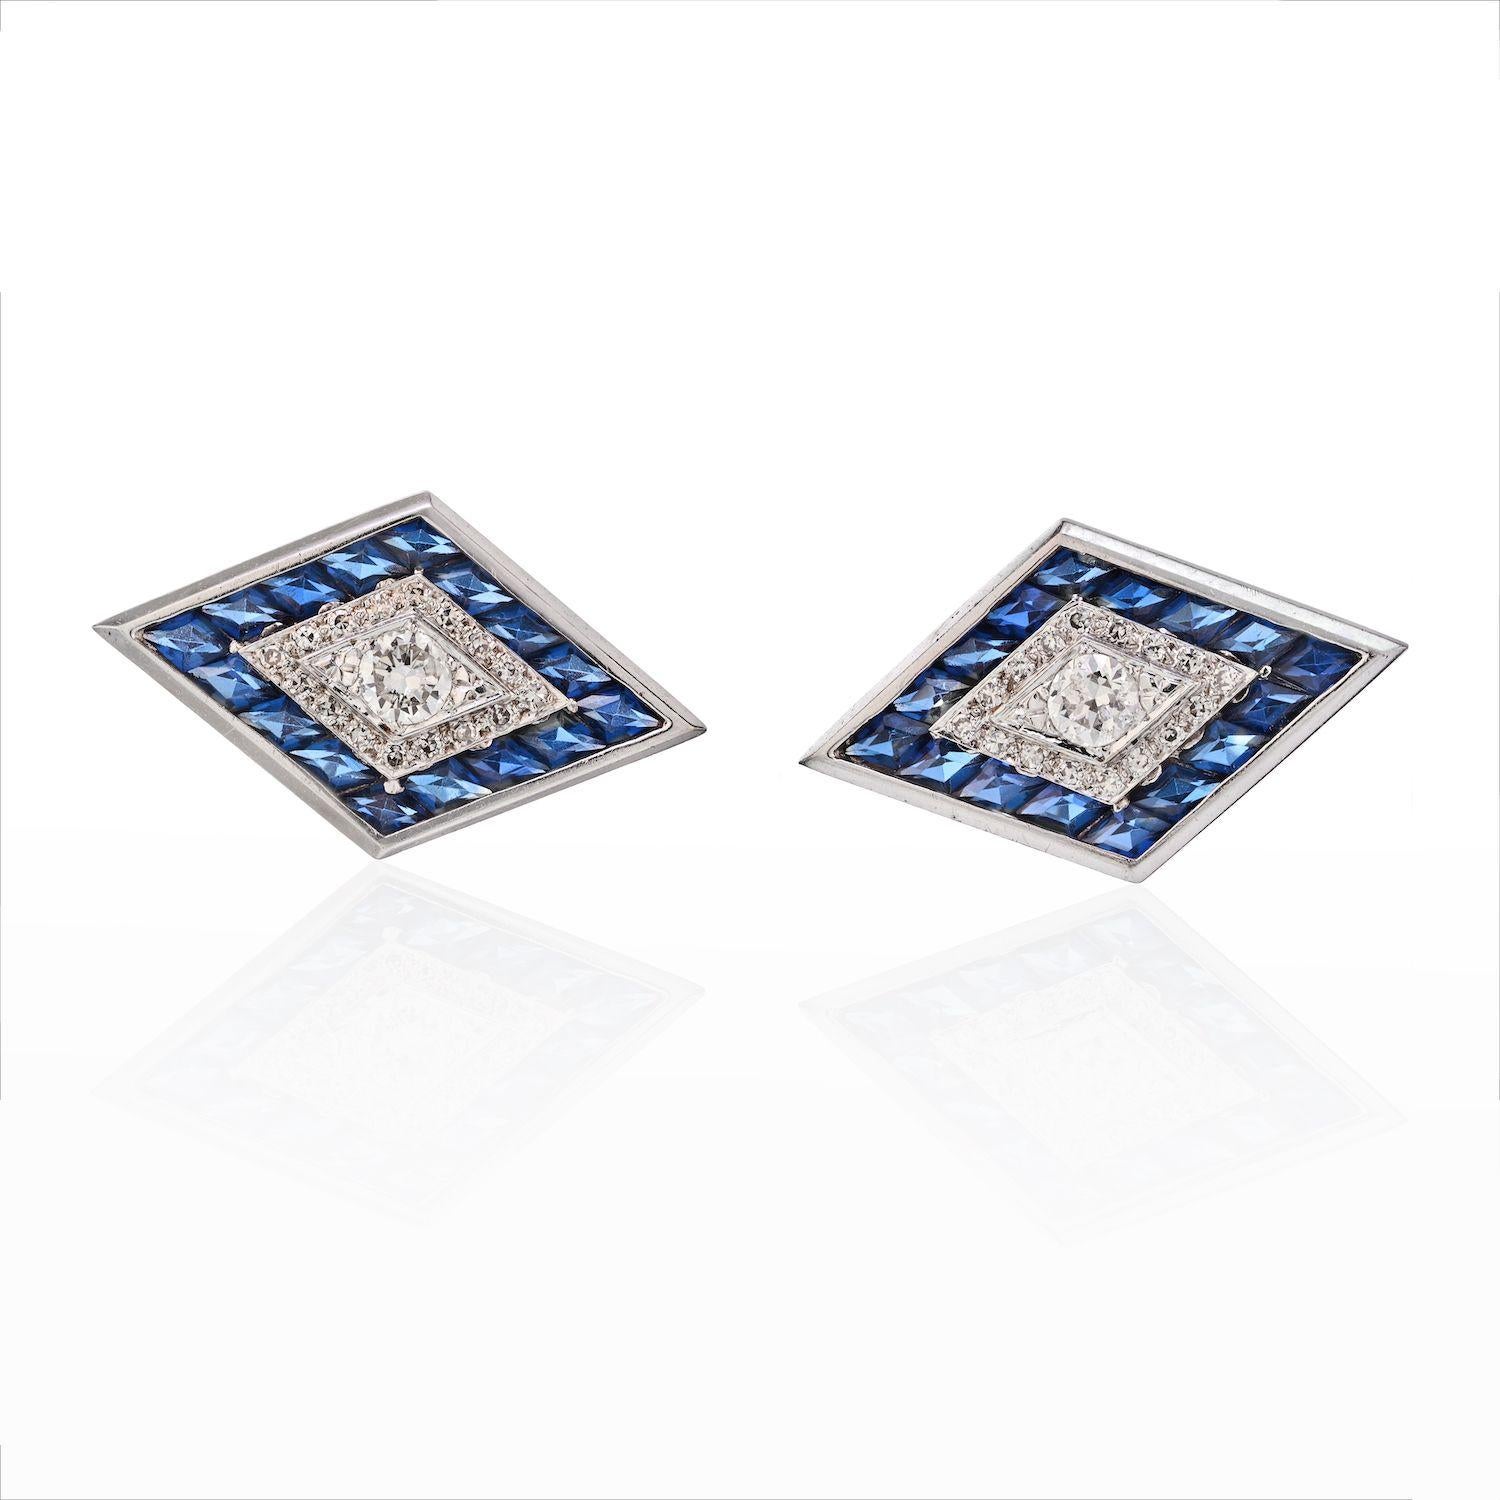 Large 14k white gold cufflinks, crafted by Lucien Piccard, decorated with blue sapphires and approximately diamonds. Top of the cufflink measures 34mm x 20mm. 
Marked Lucien Piccard 14kt. Weight - 17 grams